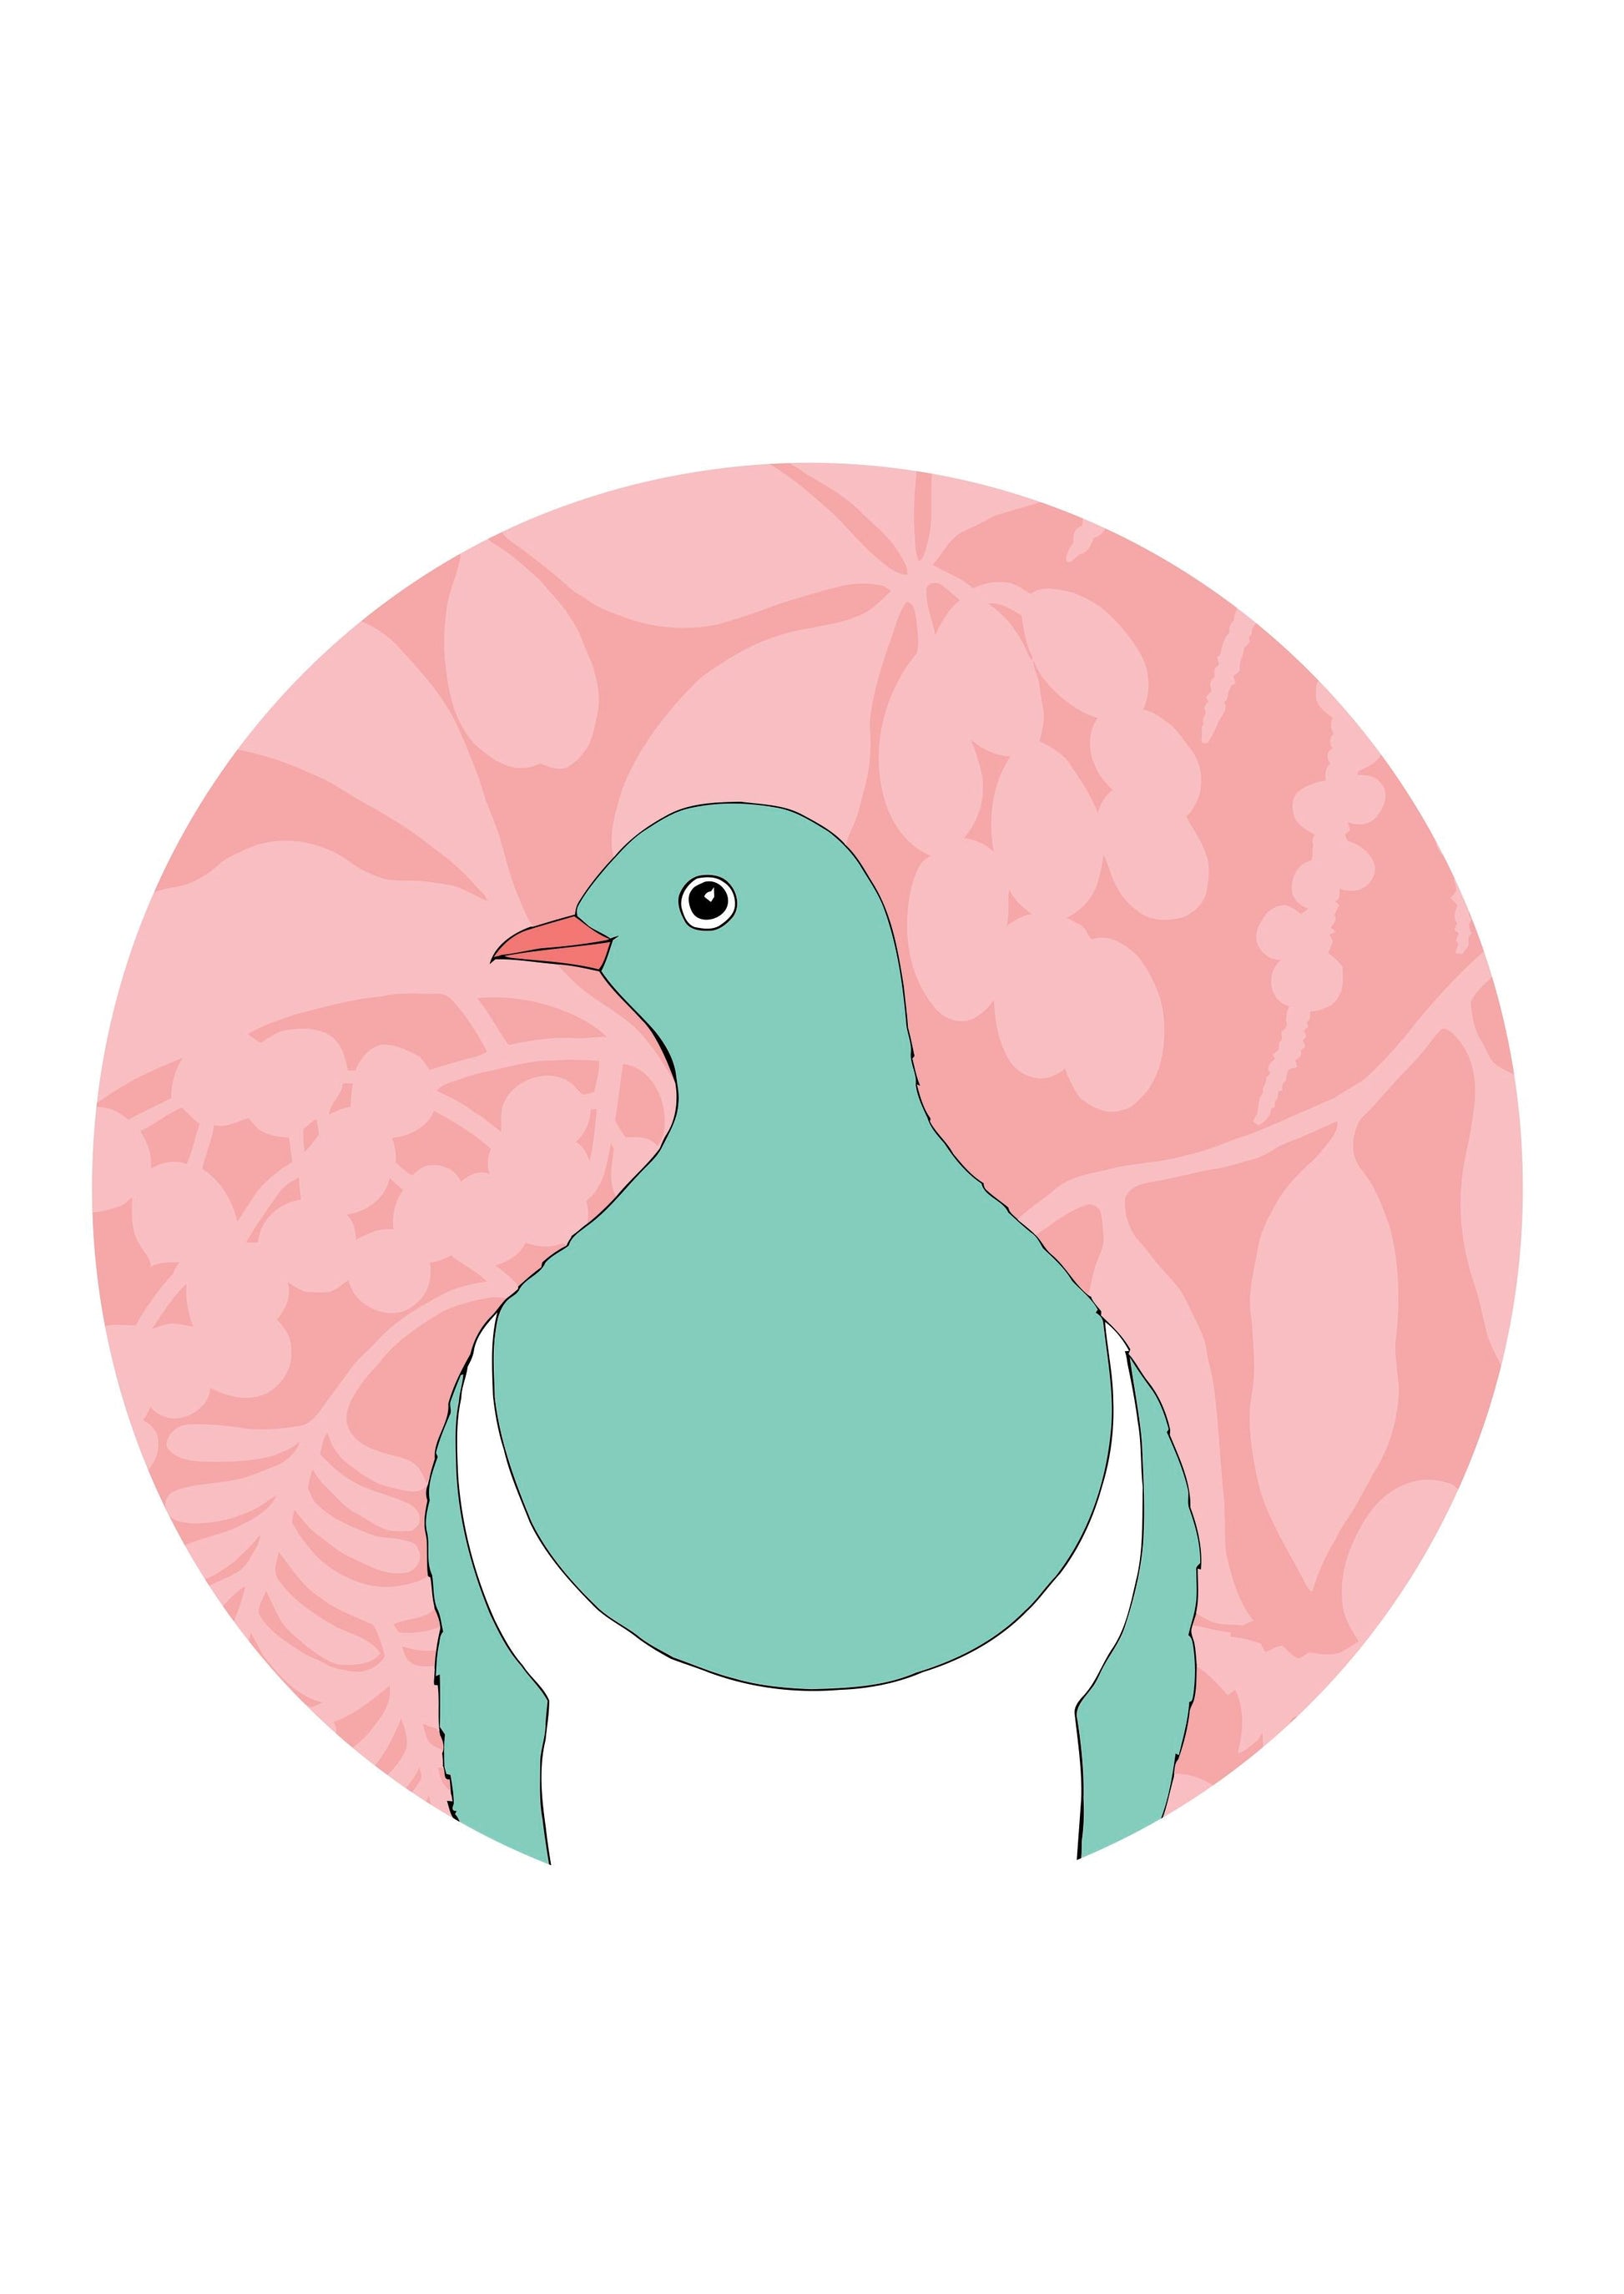 Art spot, wall decal of the Kereru of New Zealand, by Hansby Design